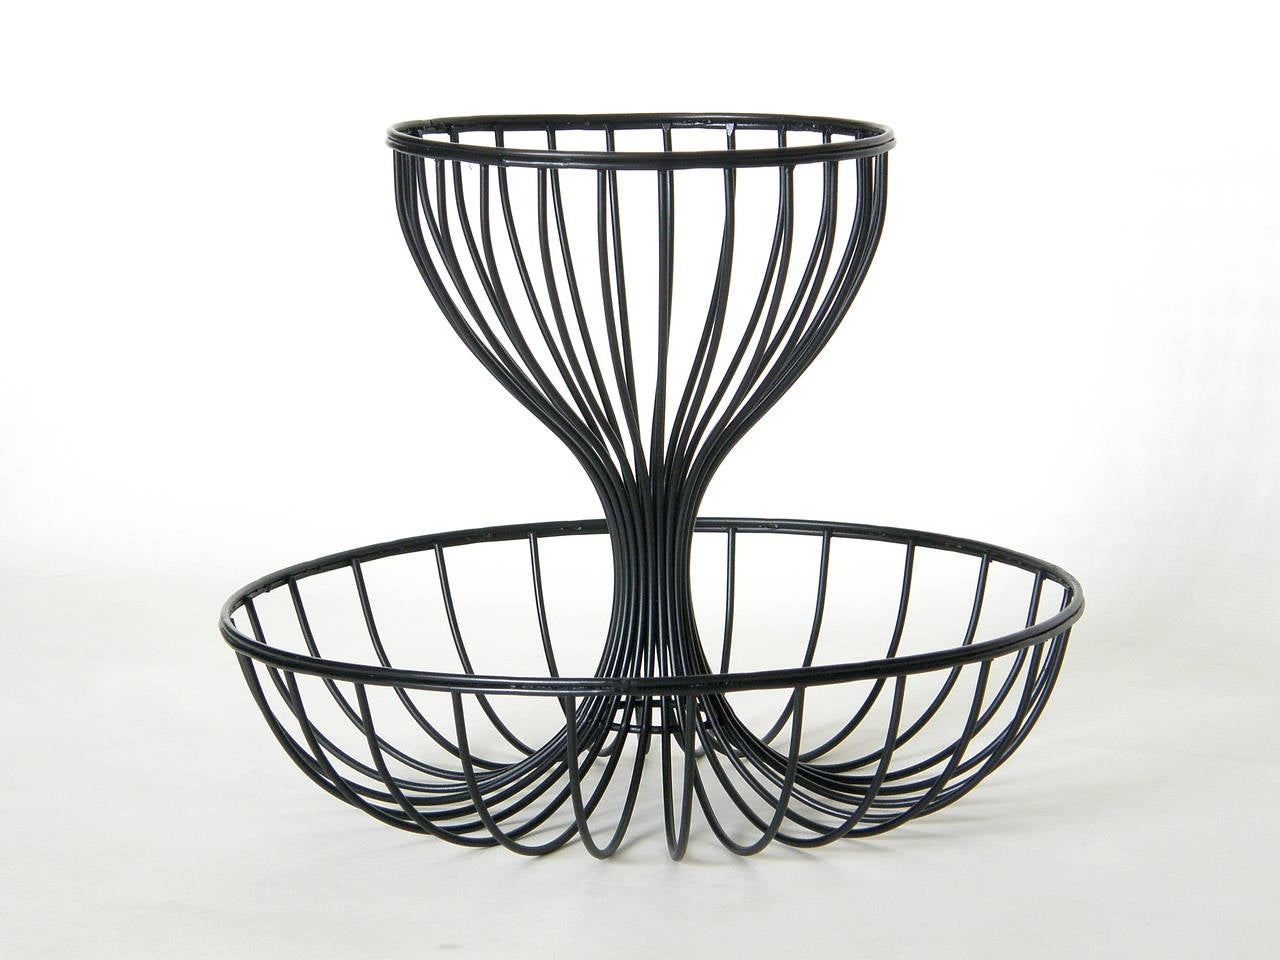 Two-tiered wire basket designed by Andree Ferris and Reta Shacknove. Ferris Shacknove’s line of 